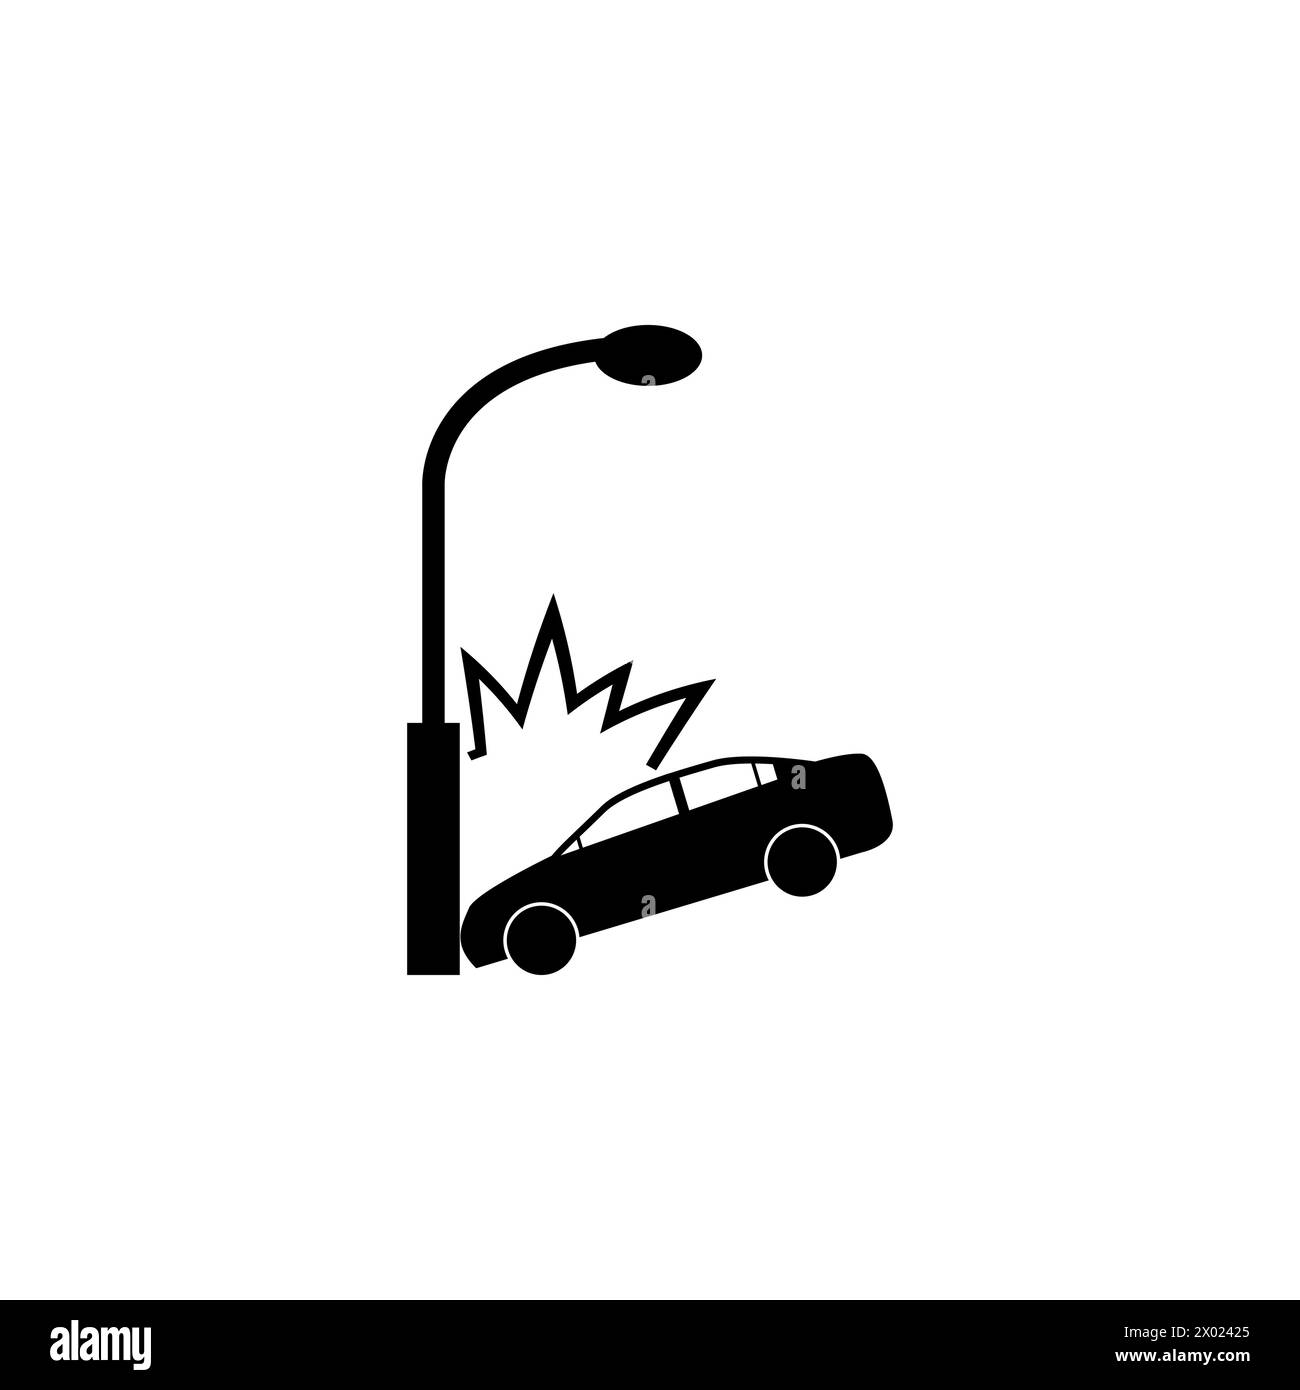 Car Crashed into Lamp Post flat vector icon. Simple solid symbol isolated on white background Stock Vector